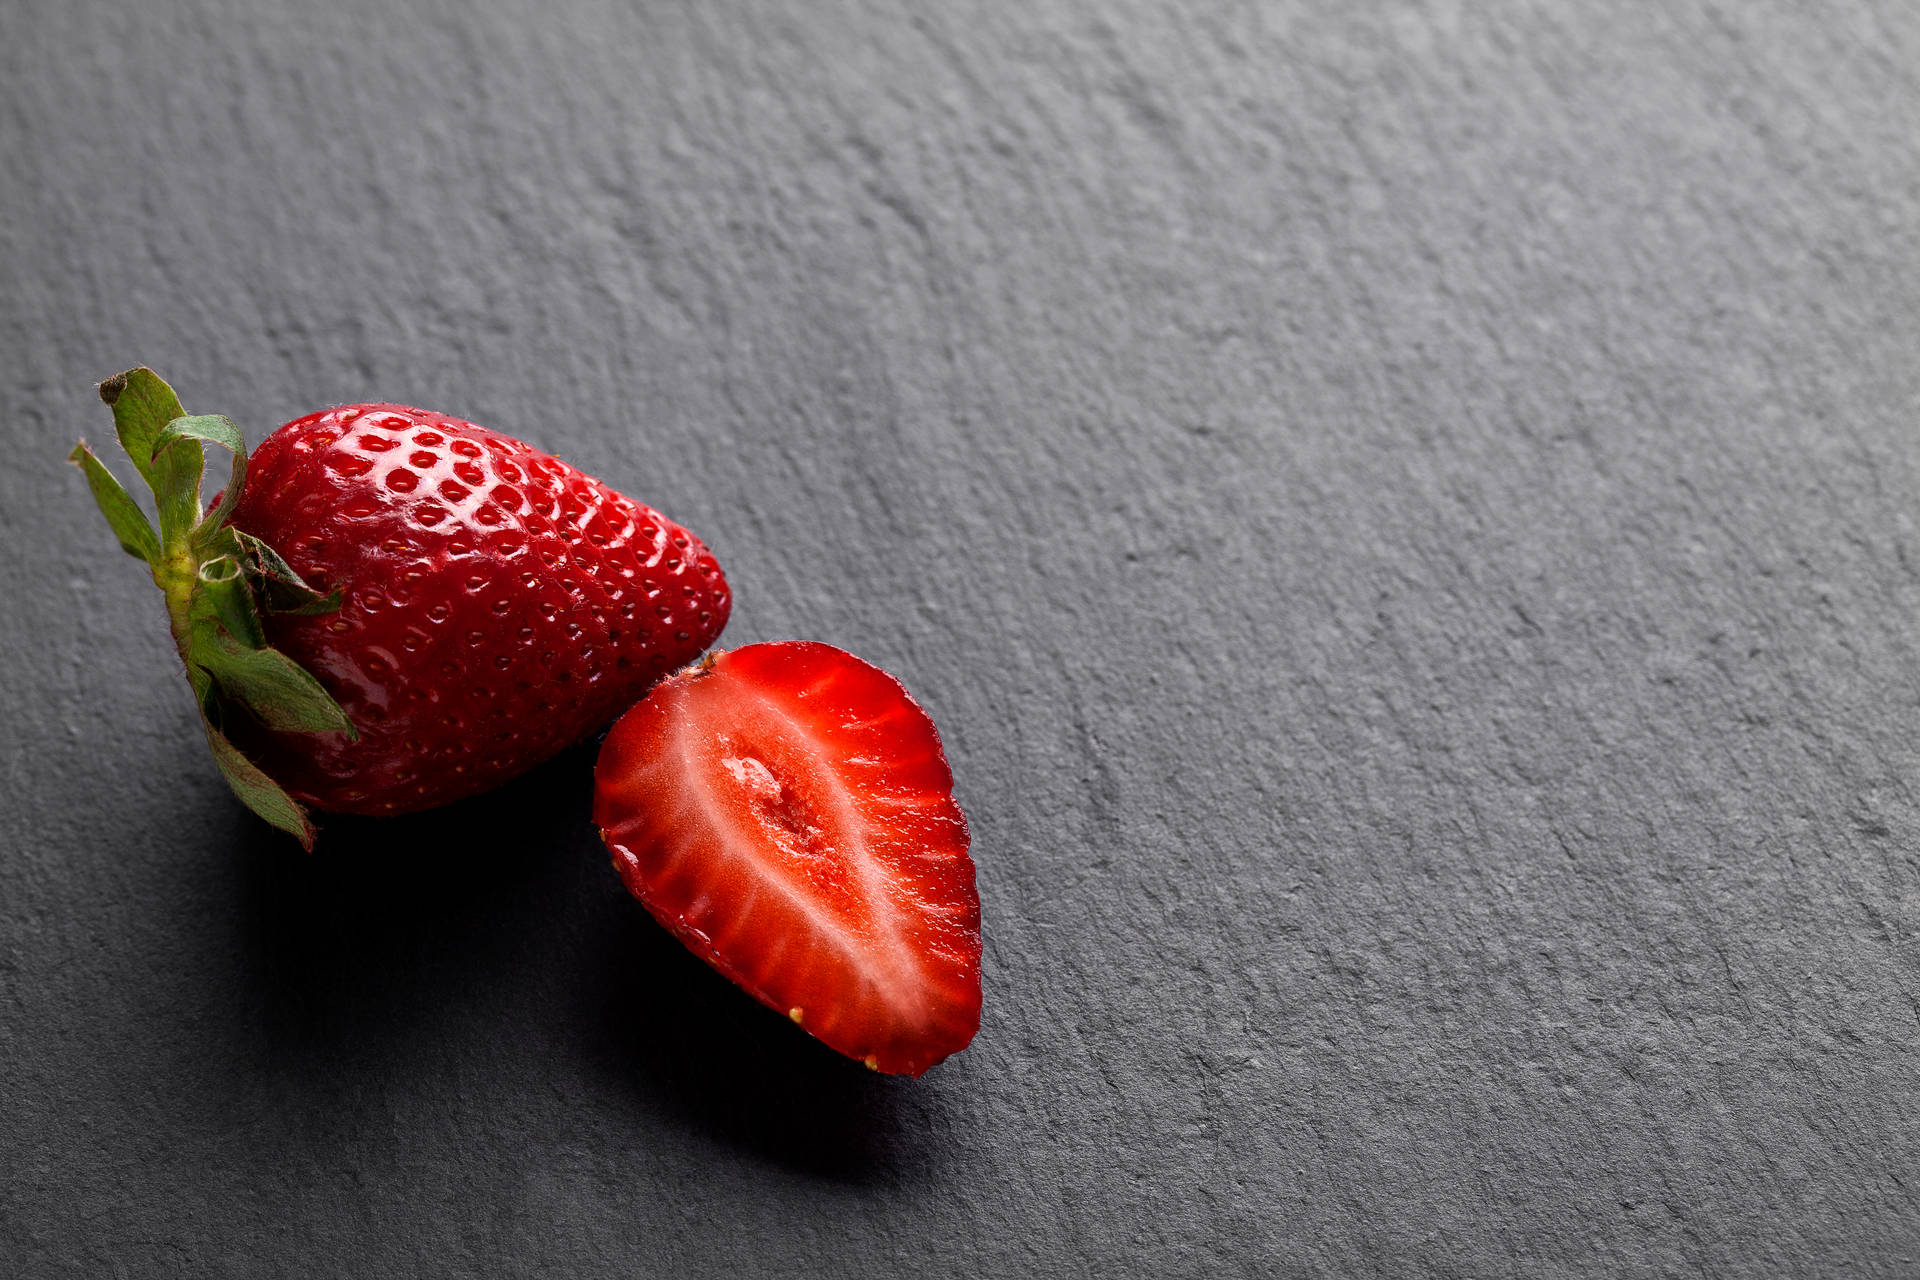 Strawberry 5616X3744 Wallpaper and Background Image